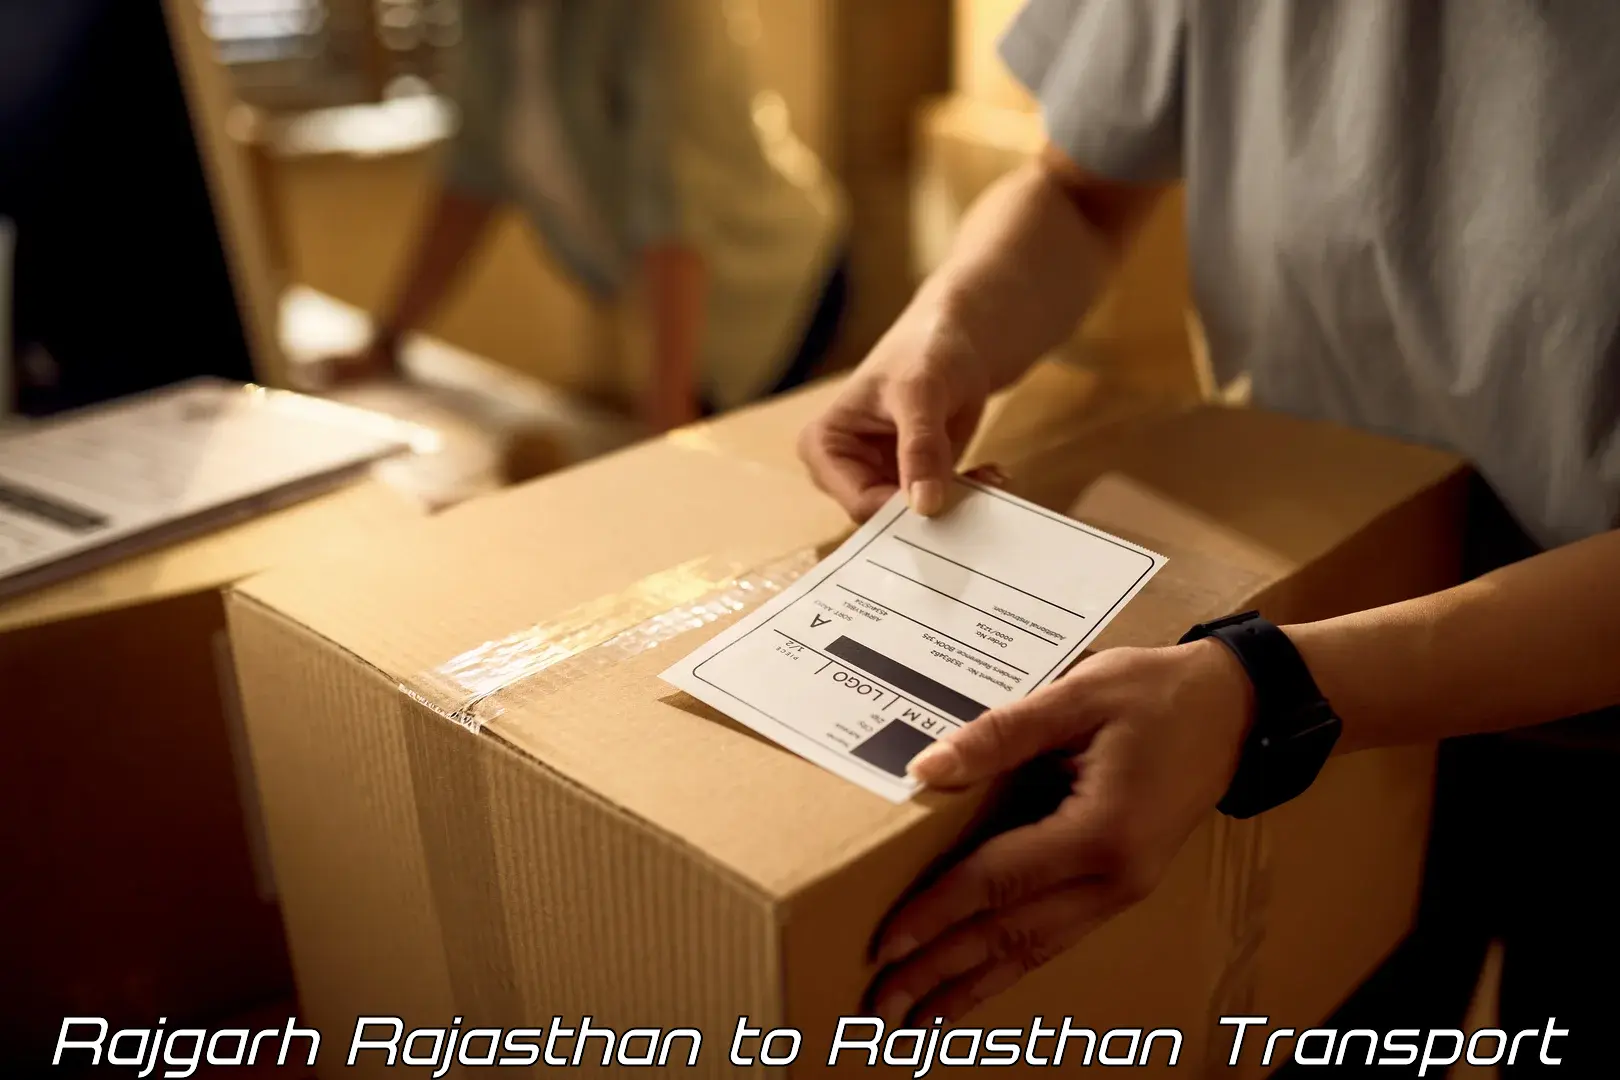 Package delivery services Rajgarh Rajasthan to Ajmer